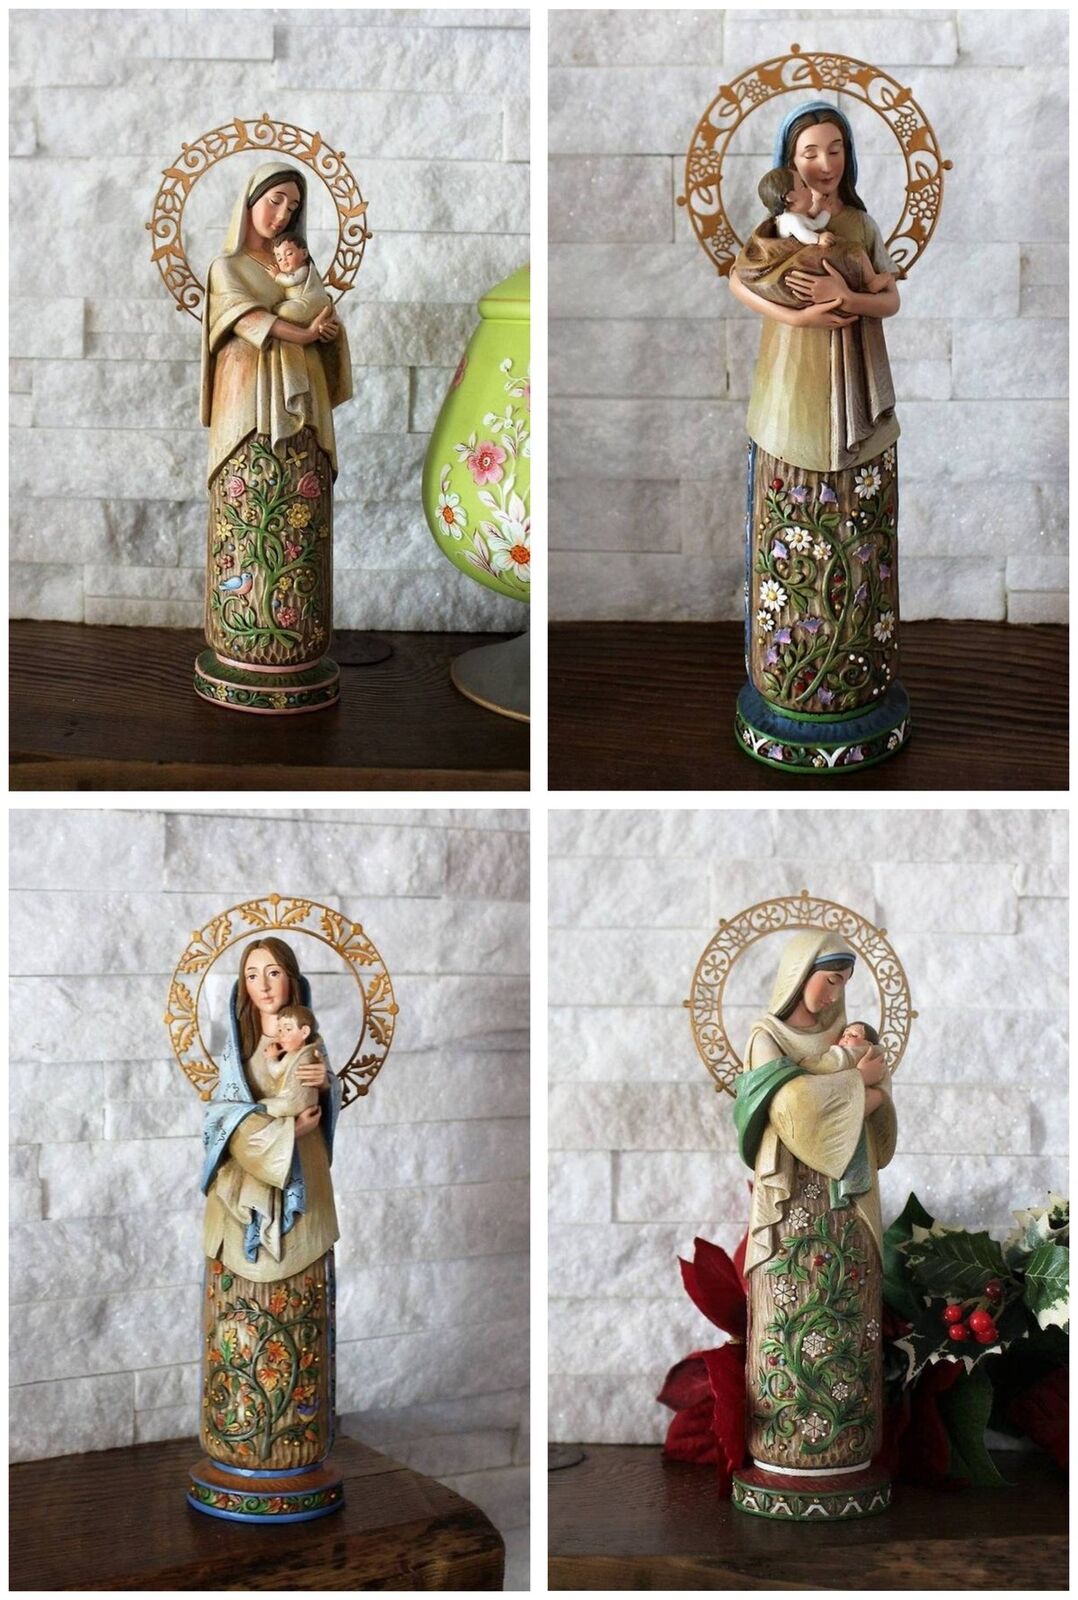 Madonna Mary Statue Set of 4 Resin 10 inch 4 Seasons Collection Ornate Floral